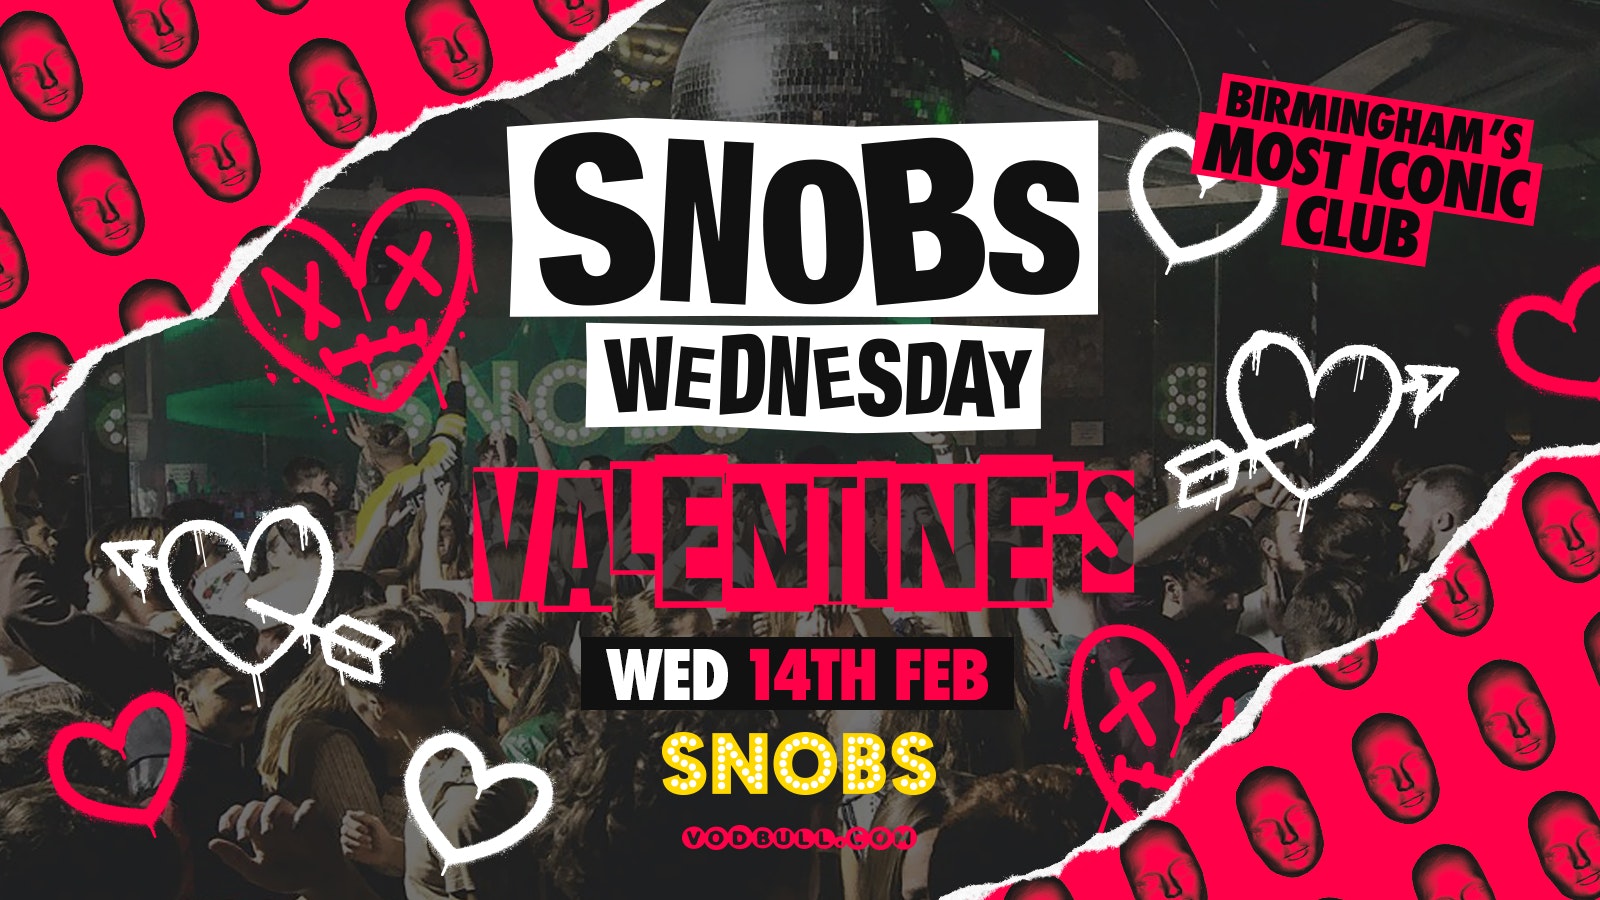 Snobs Wednesday Valentine’s [TONIGHT] ❤️ 14th Feb❤️ Two Rooms of Music + the Games room!!